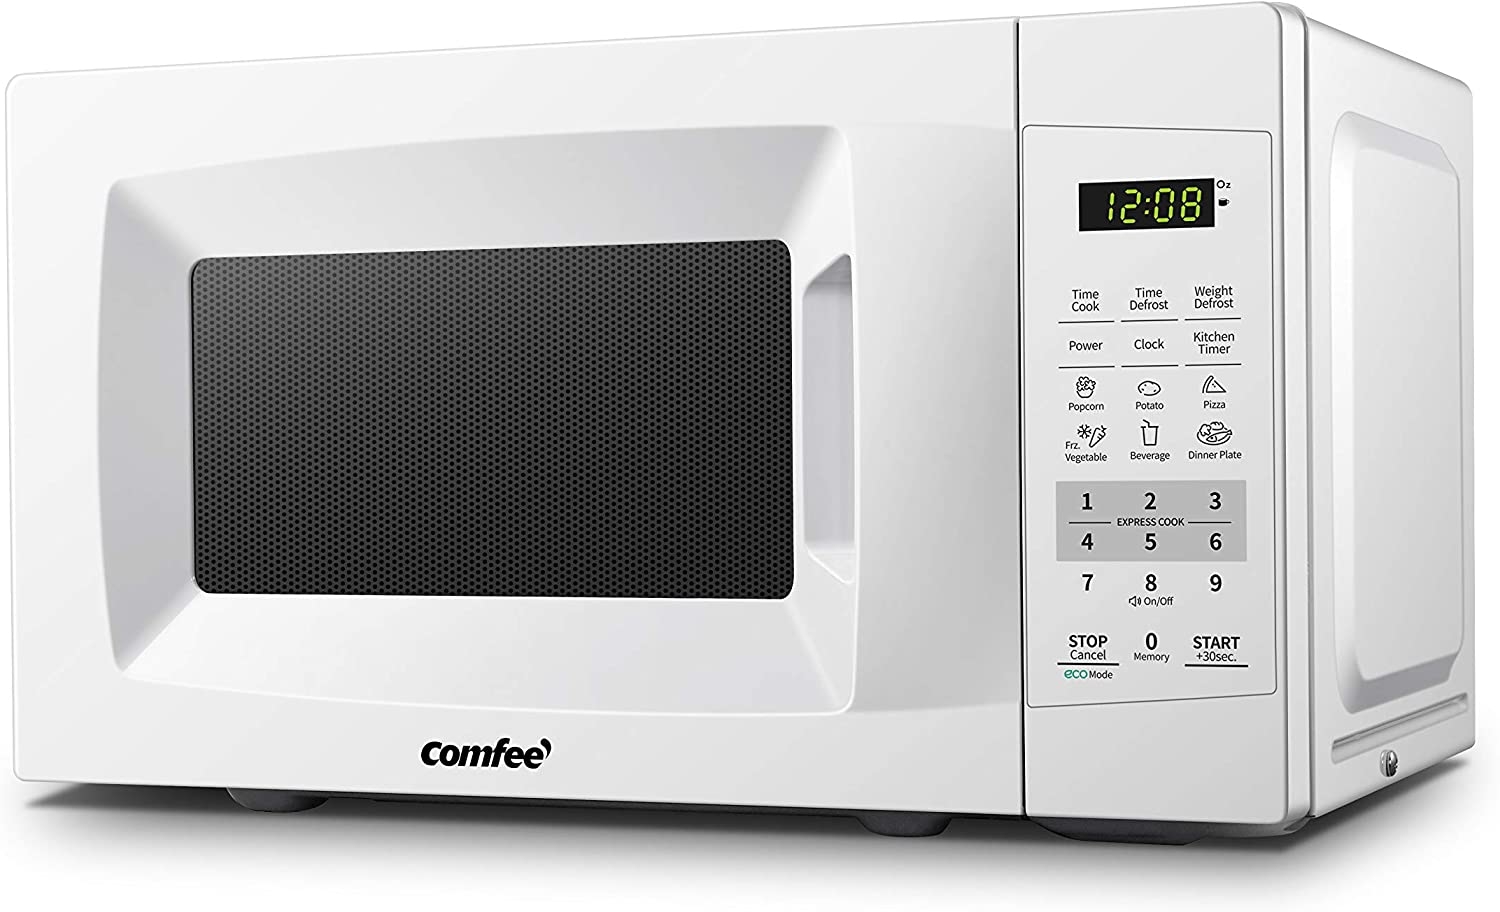 COMFEE’ EM720CPL-PMB Countertop Microwave Oven with Sound On/Off, ECO Mode and Easy One-Touch Buttons, 0.7cu.ft, 700W, Black